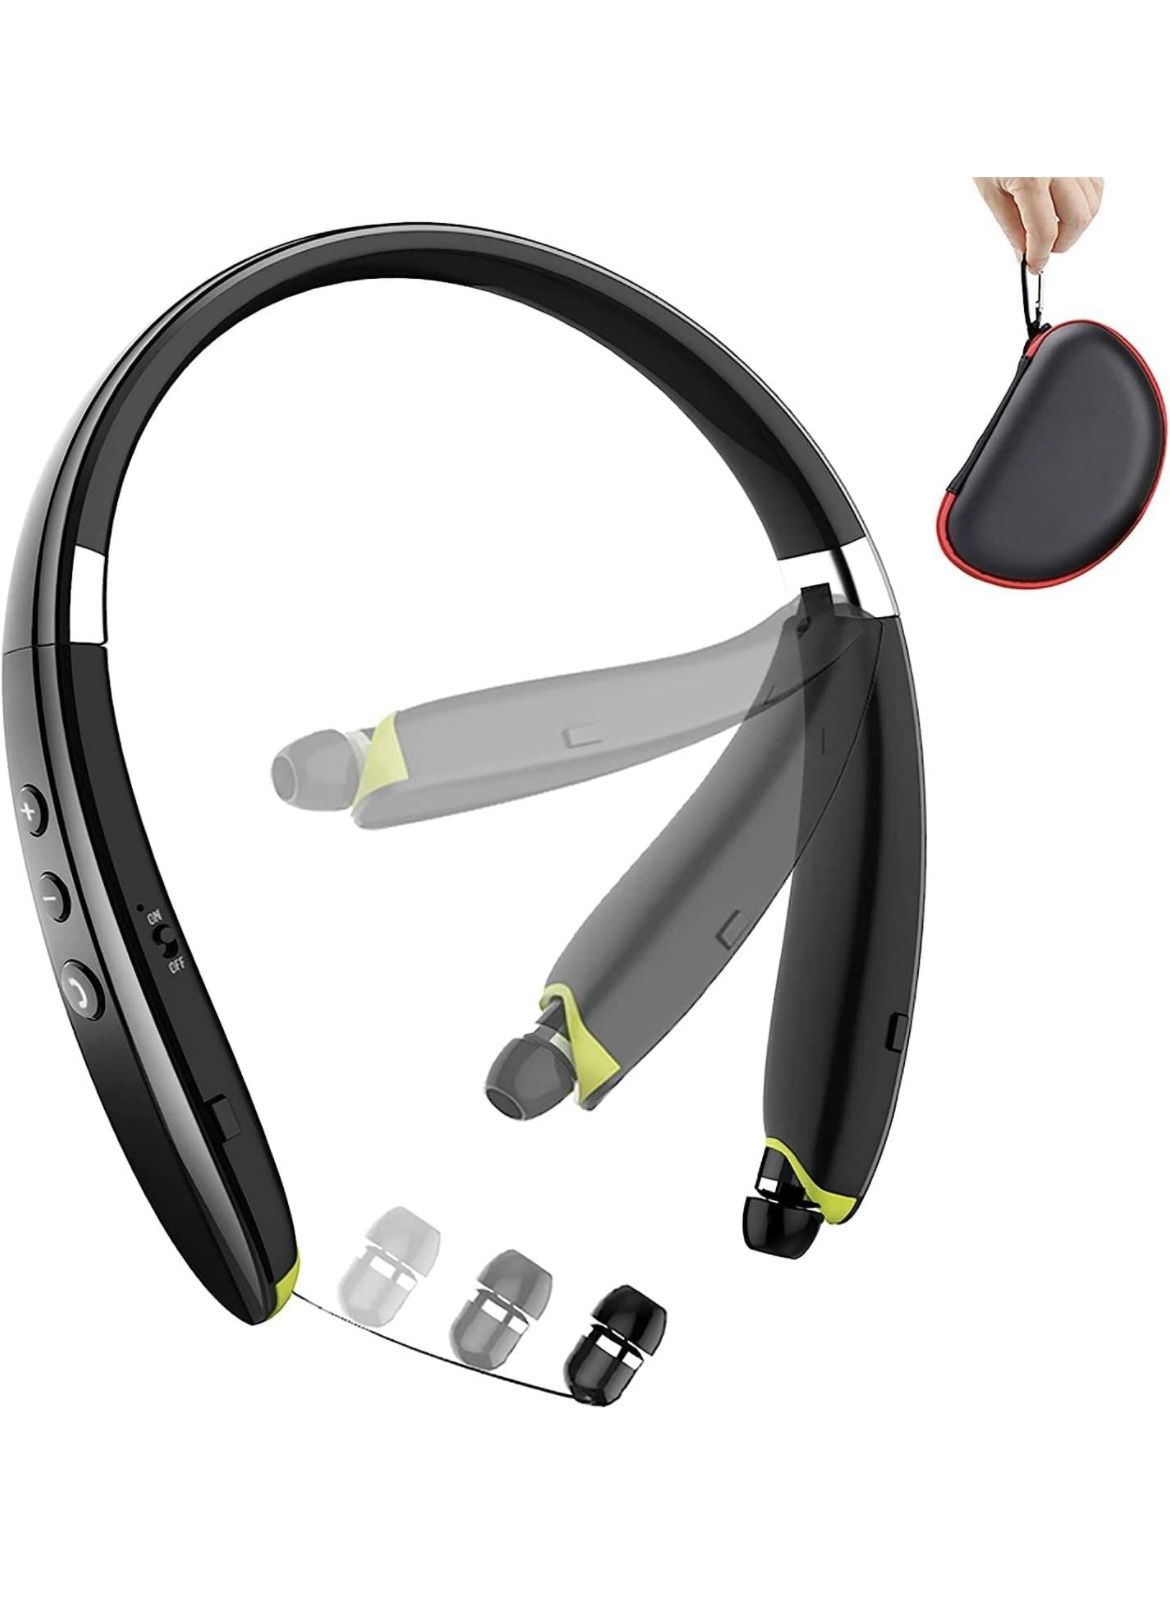 2023 Upgraded Neckband Bluetooth Headset with Retractable Earbuds, Noise Cancelling Stereo Earphones with Mic, Foldable Wireless Headphones for Sports